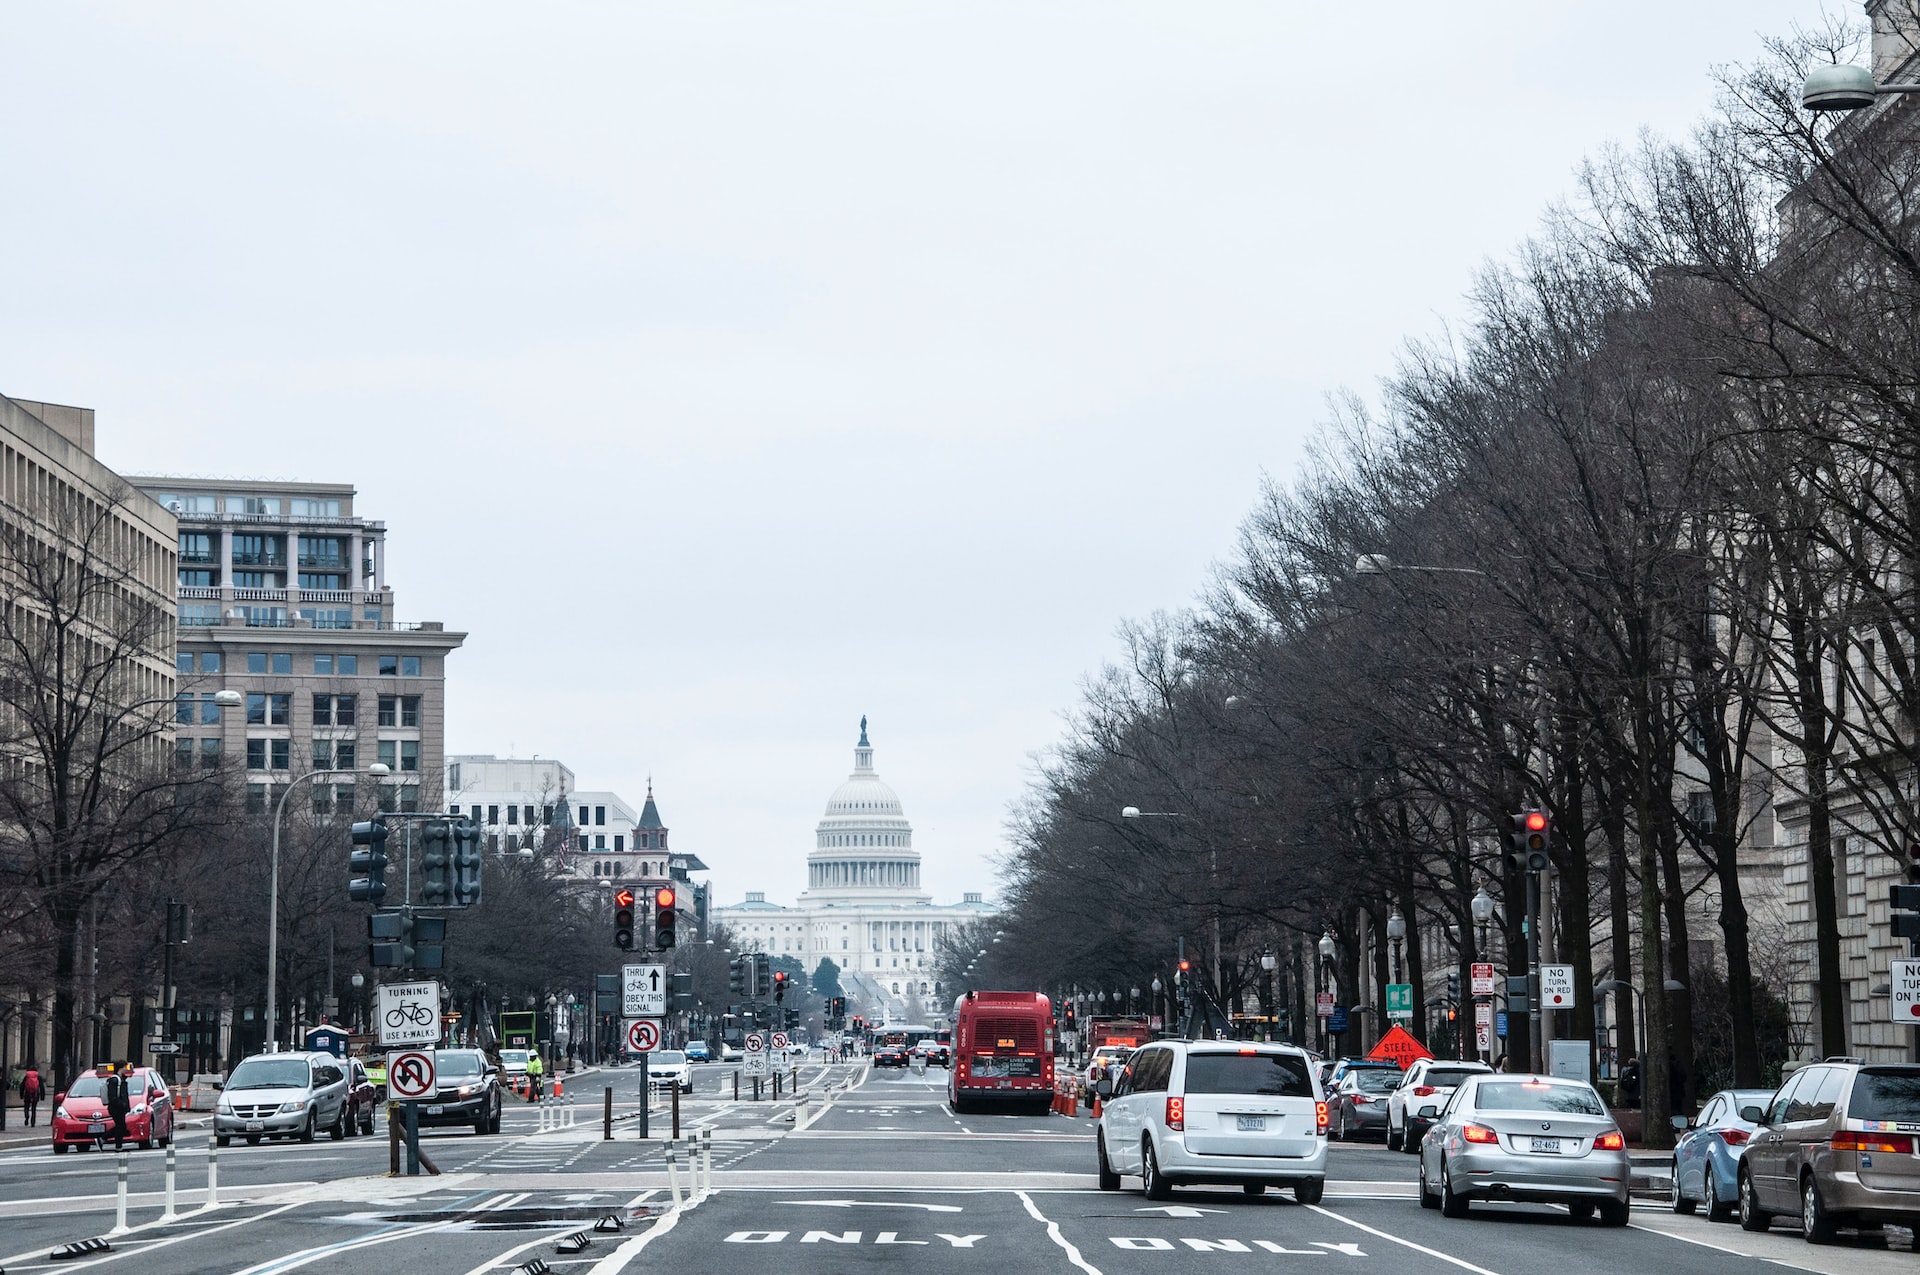 The U.S. Capitol building and a busy street on a winter day.